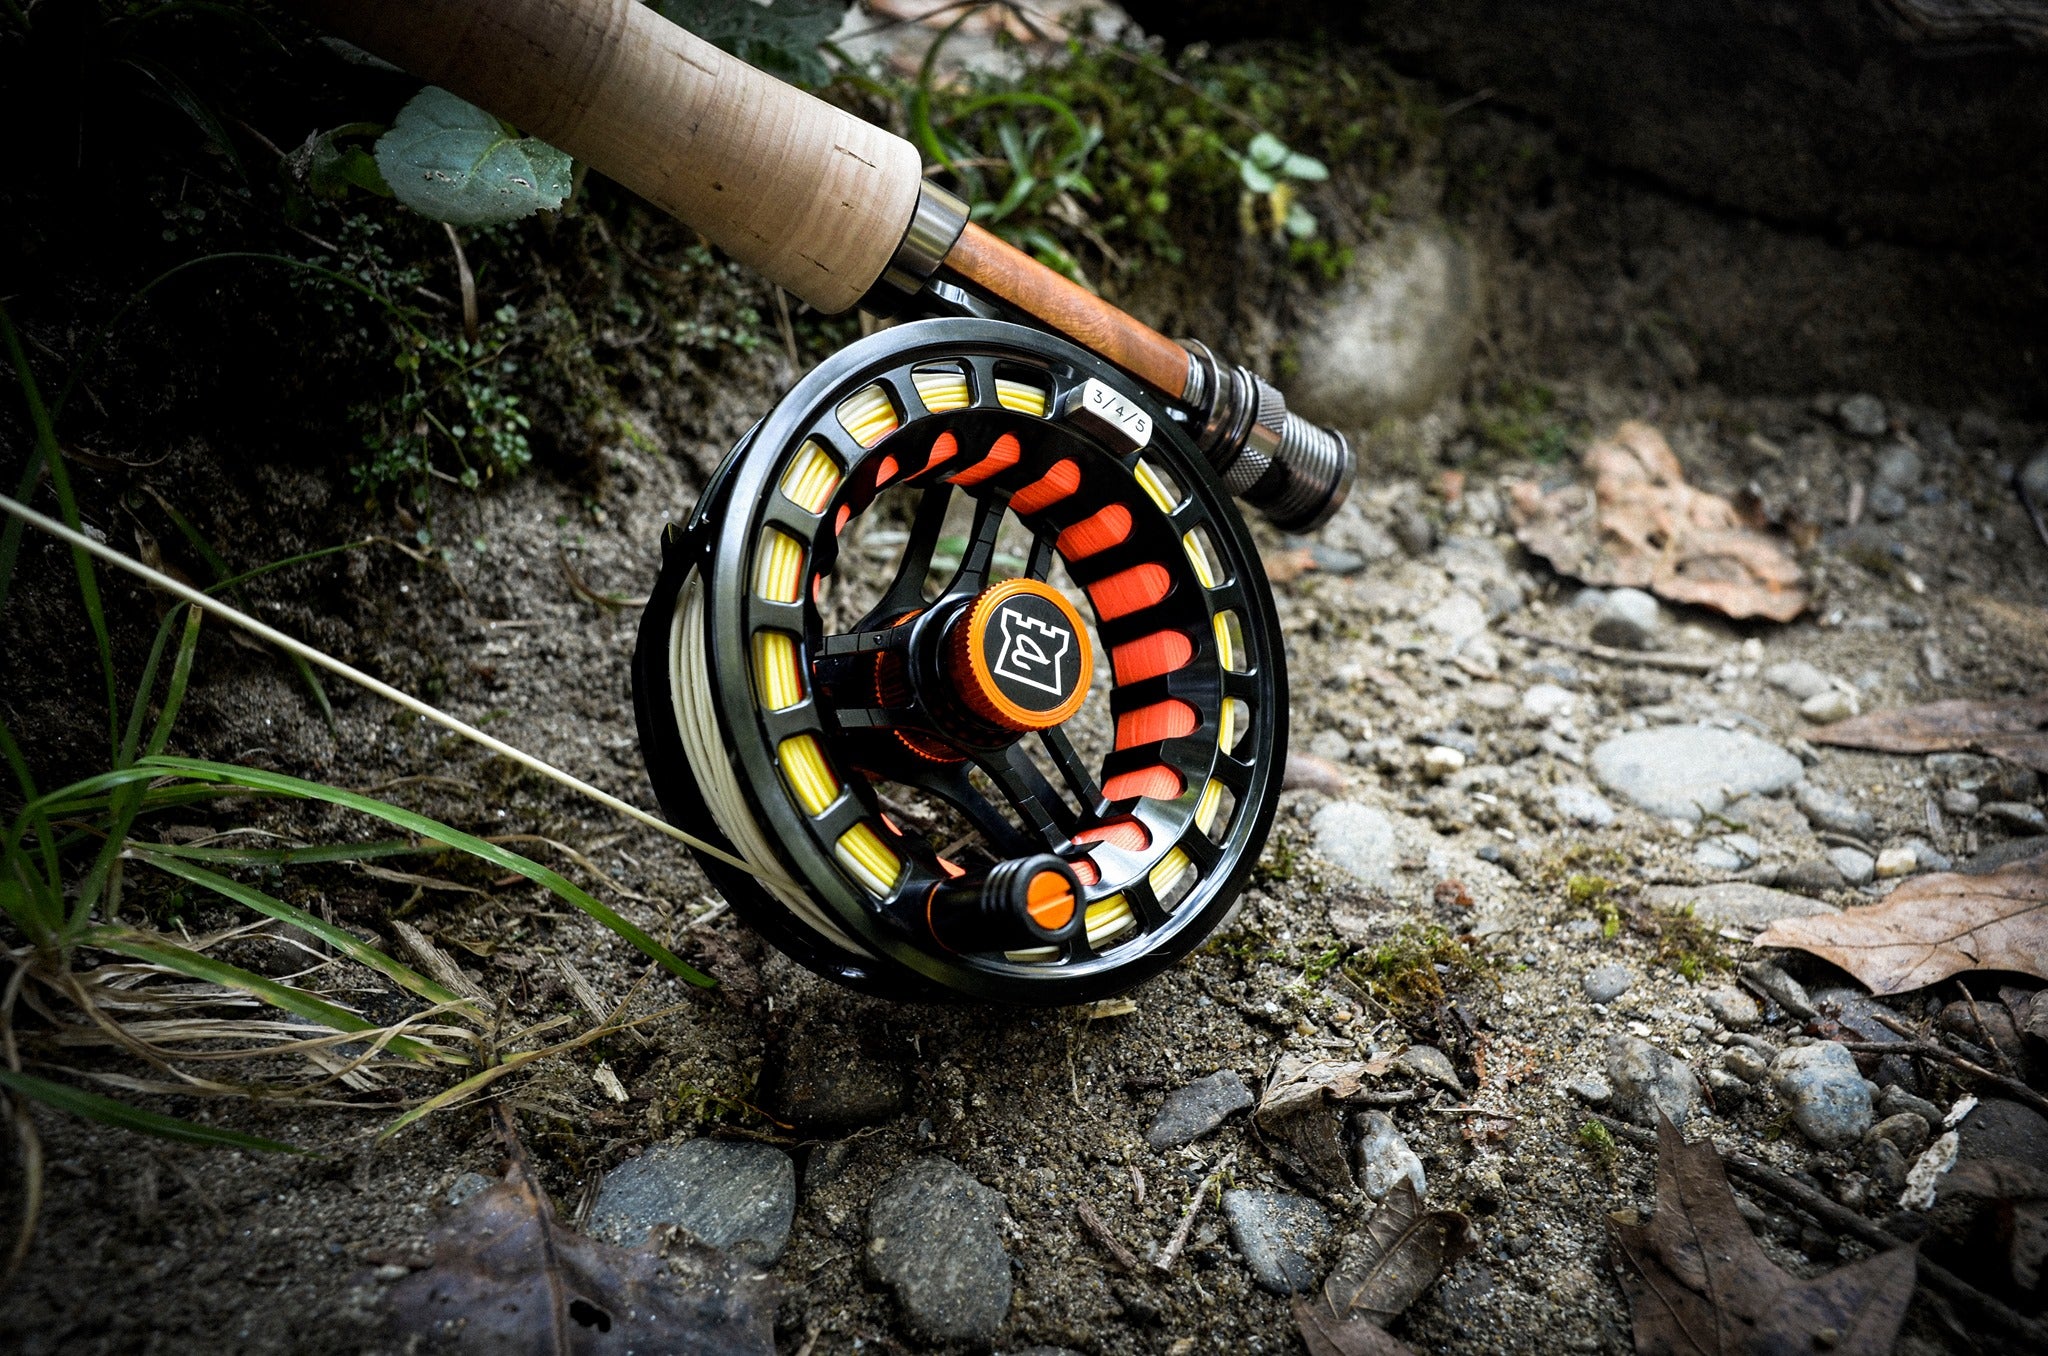 Hardy Ultradisc UDLA Fly Reel - Black  Natural Sports – Natural Sports -  The Fishing Store